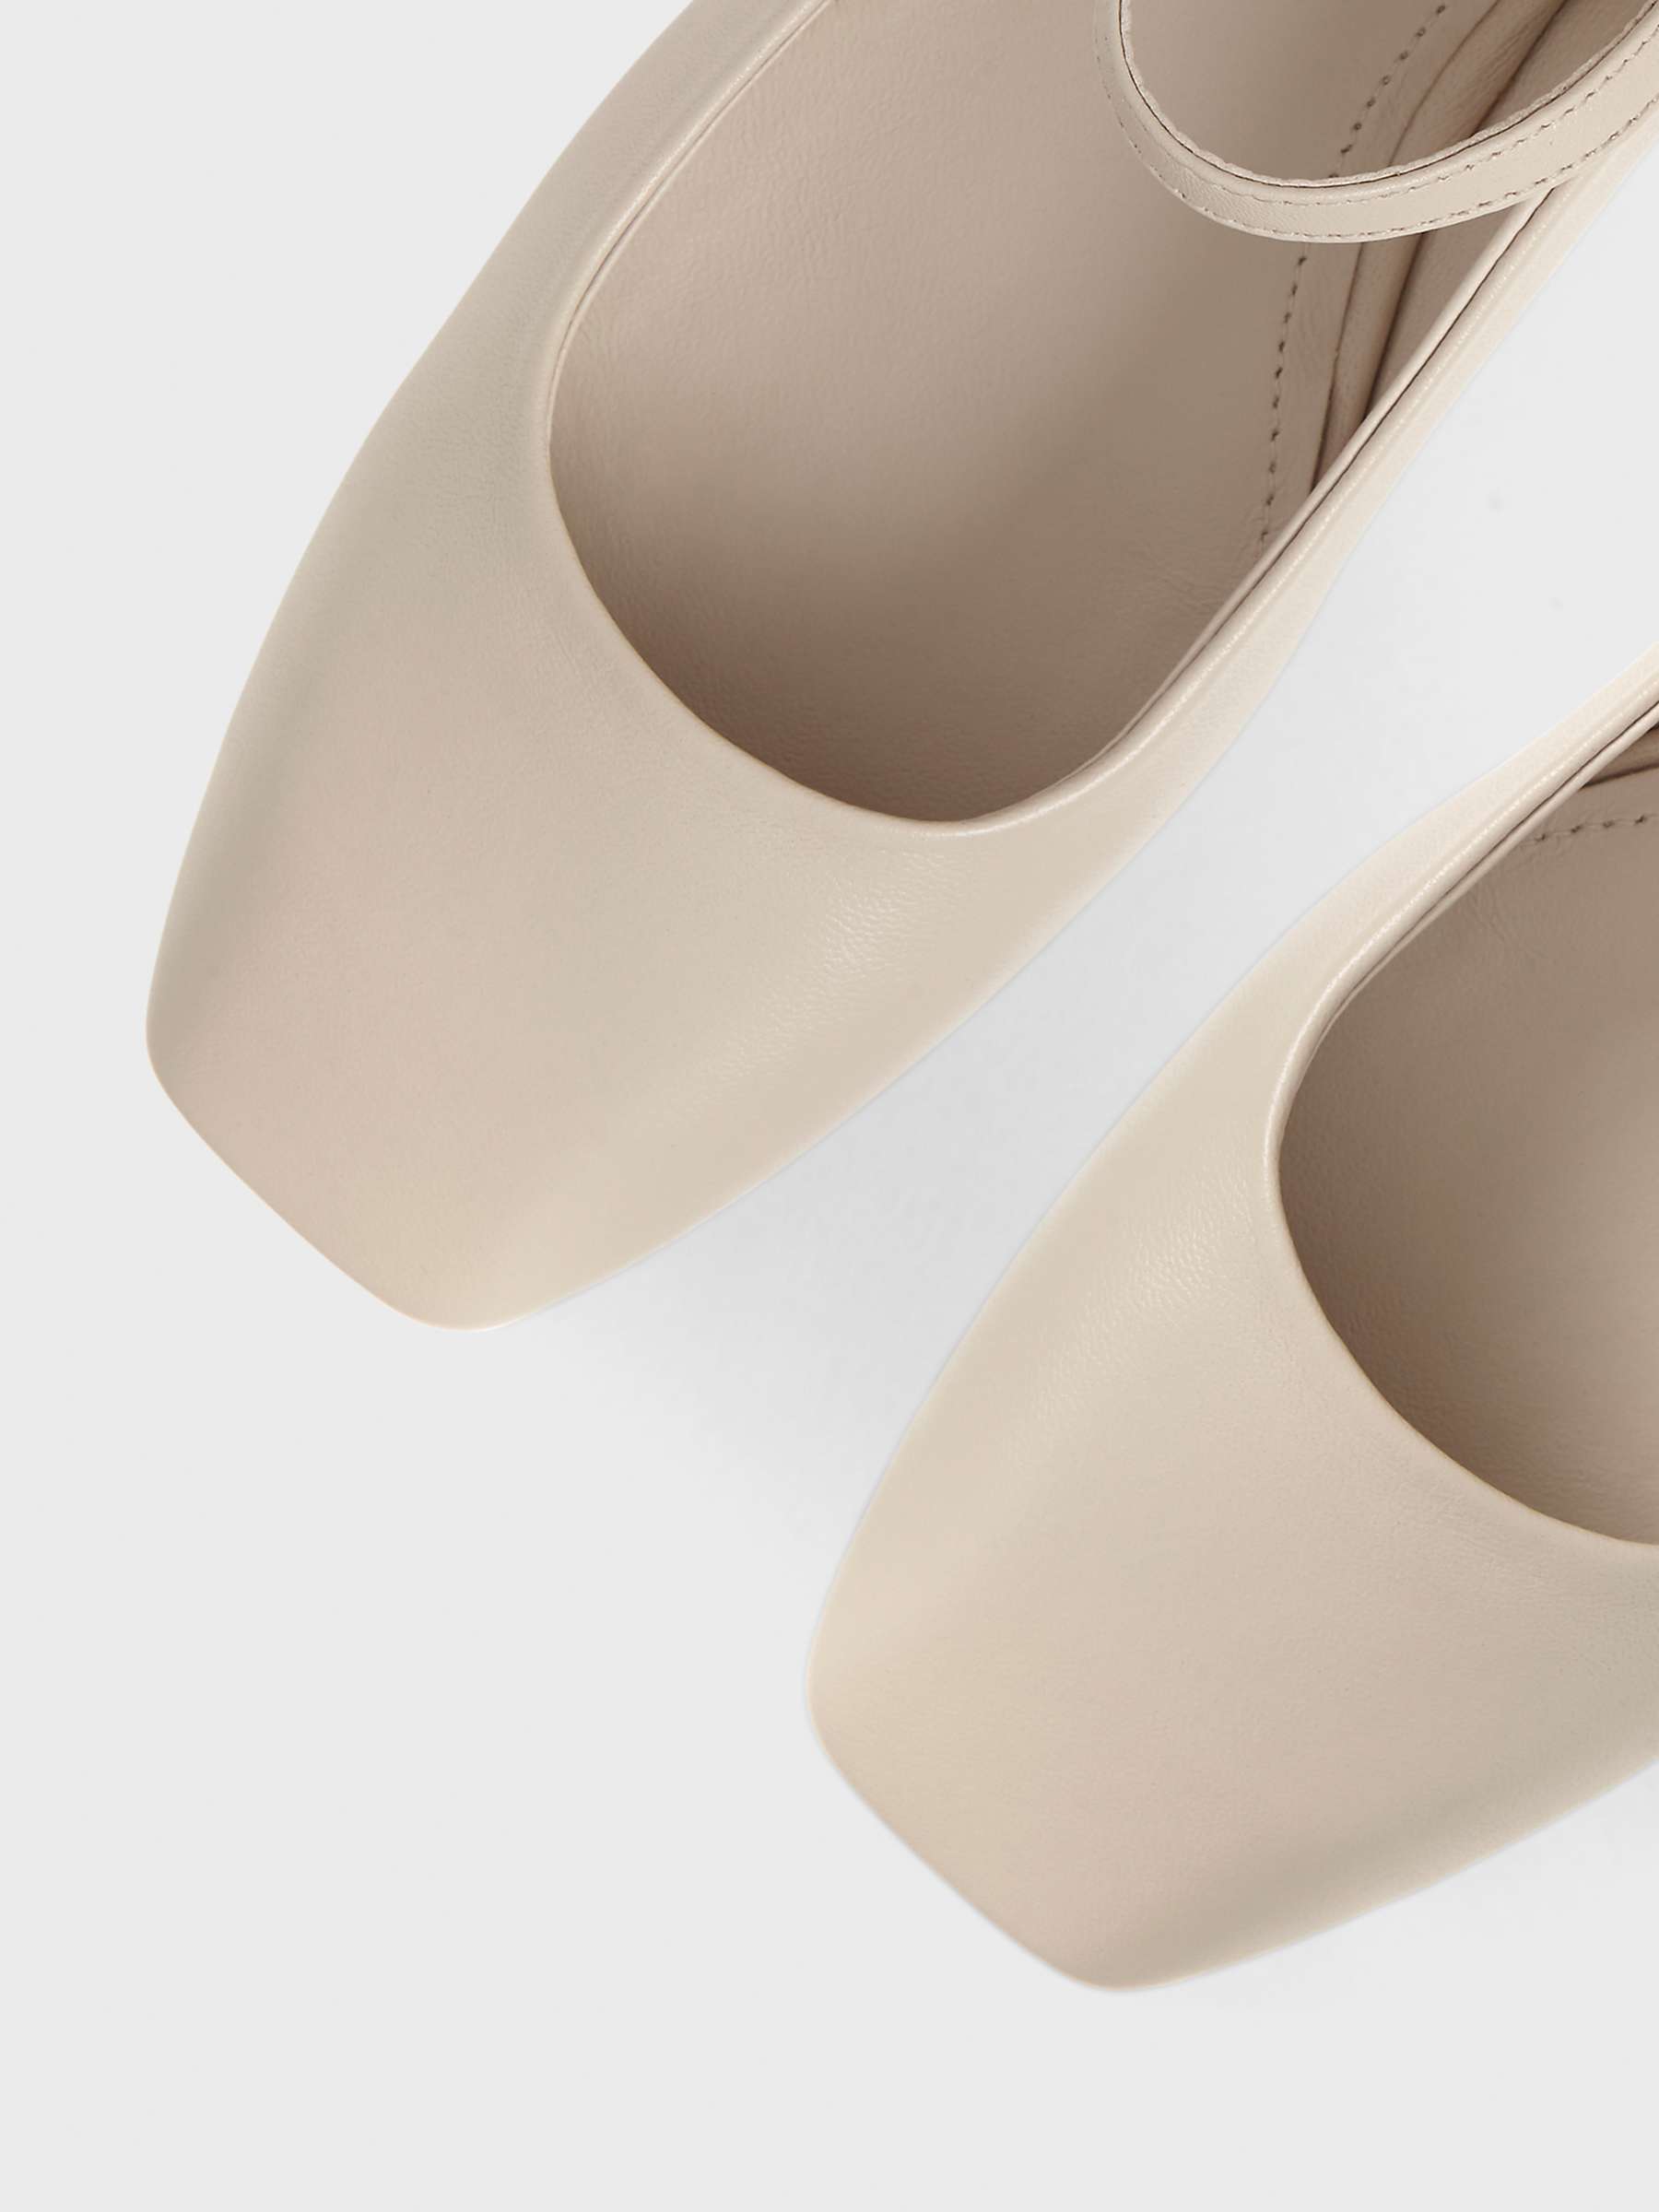 Buy Hobbs Chrissy Mary Jane Leather Shoes, Light Beige Online at johnlewis.com